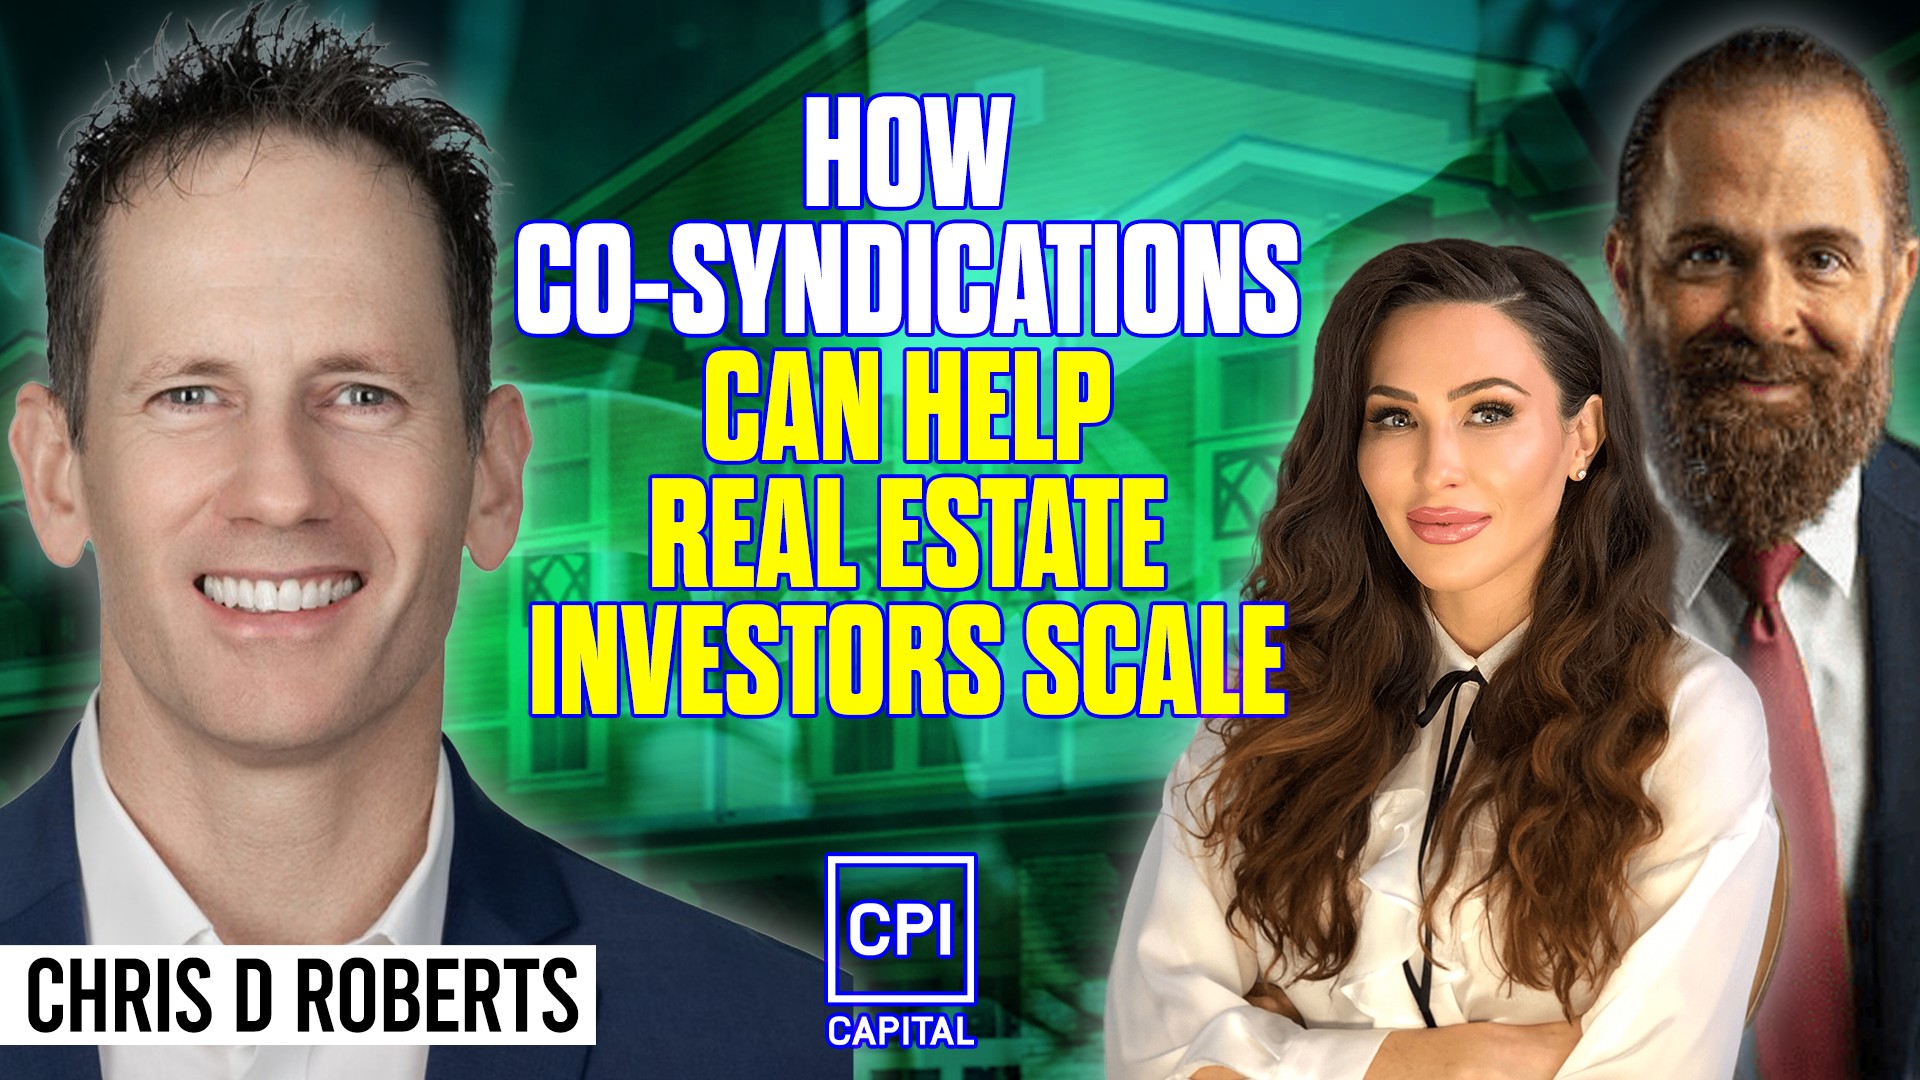 REID Chris D. Roberts | Real Estate Co-Syndication